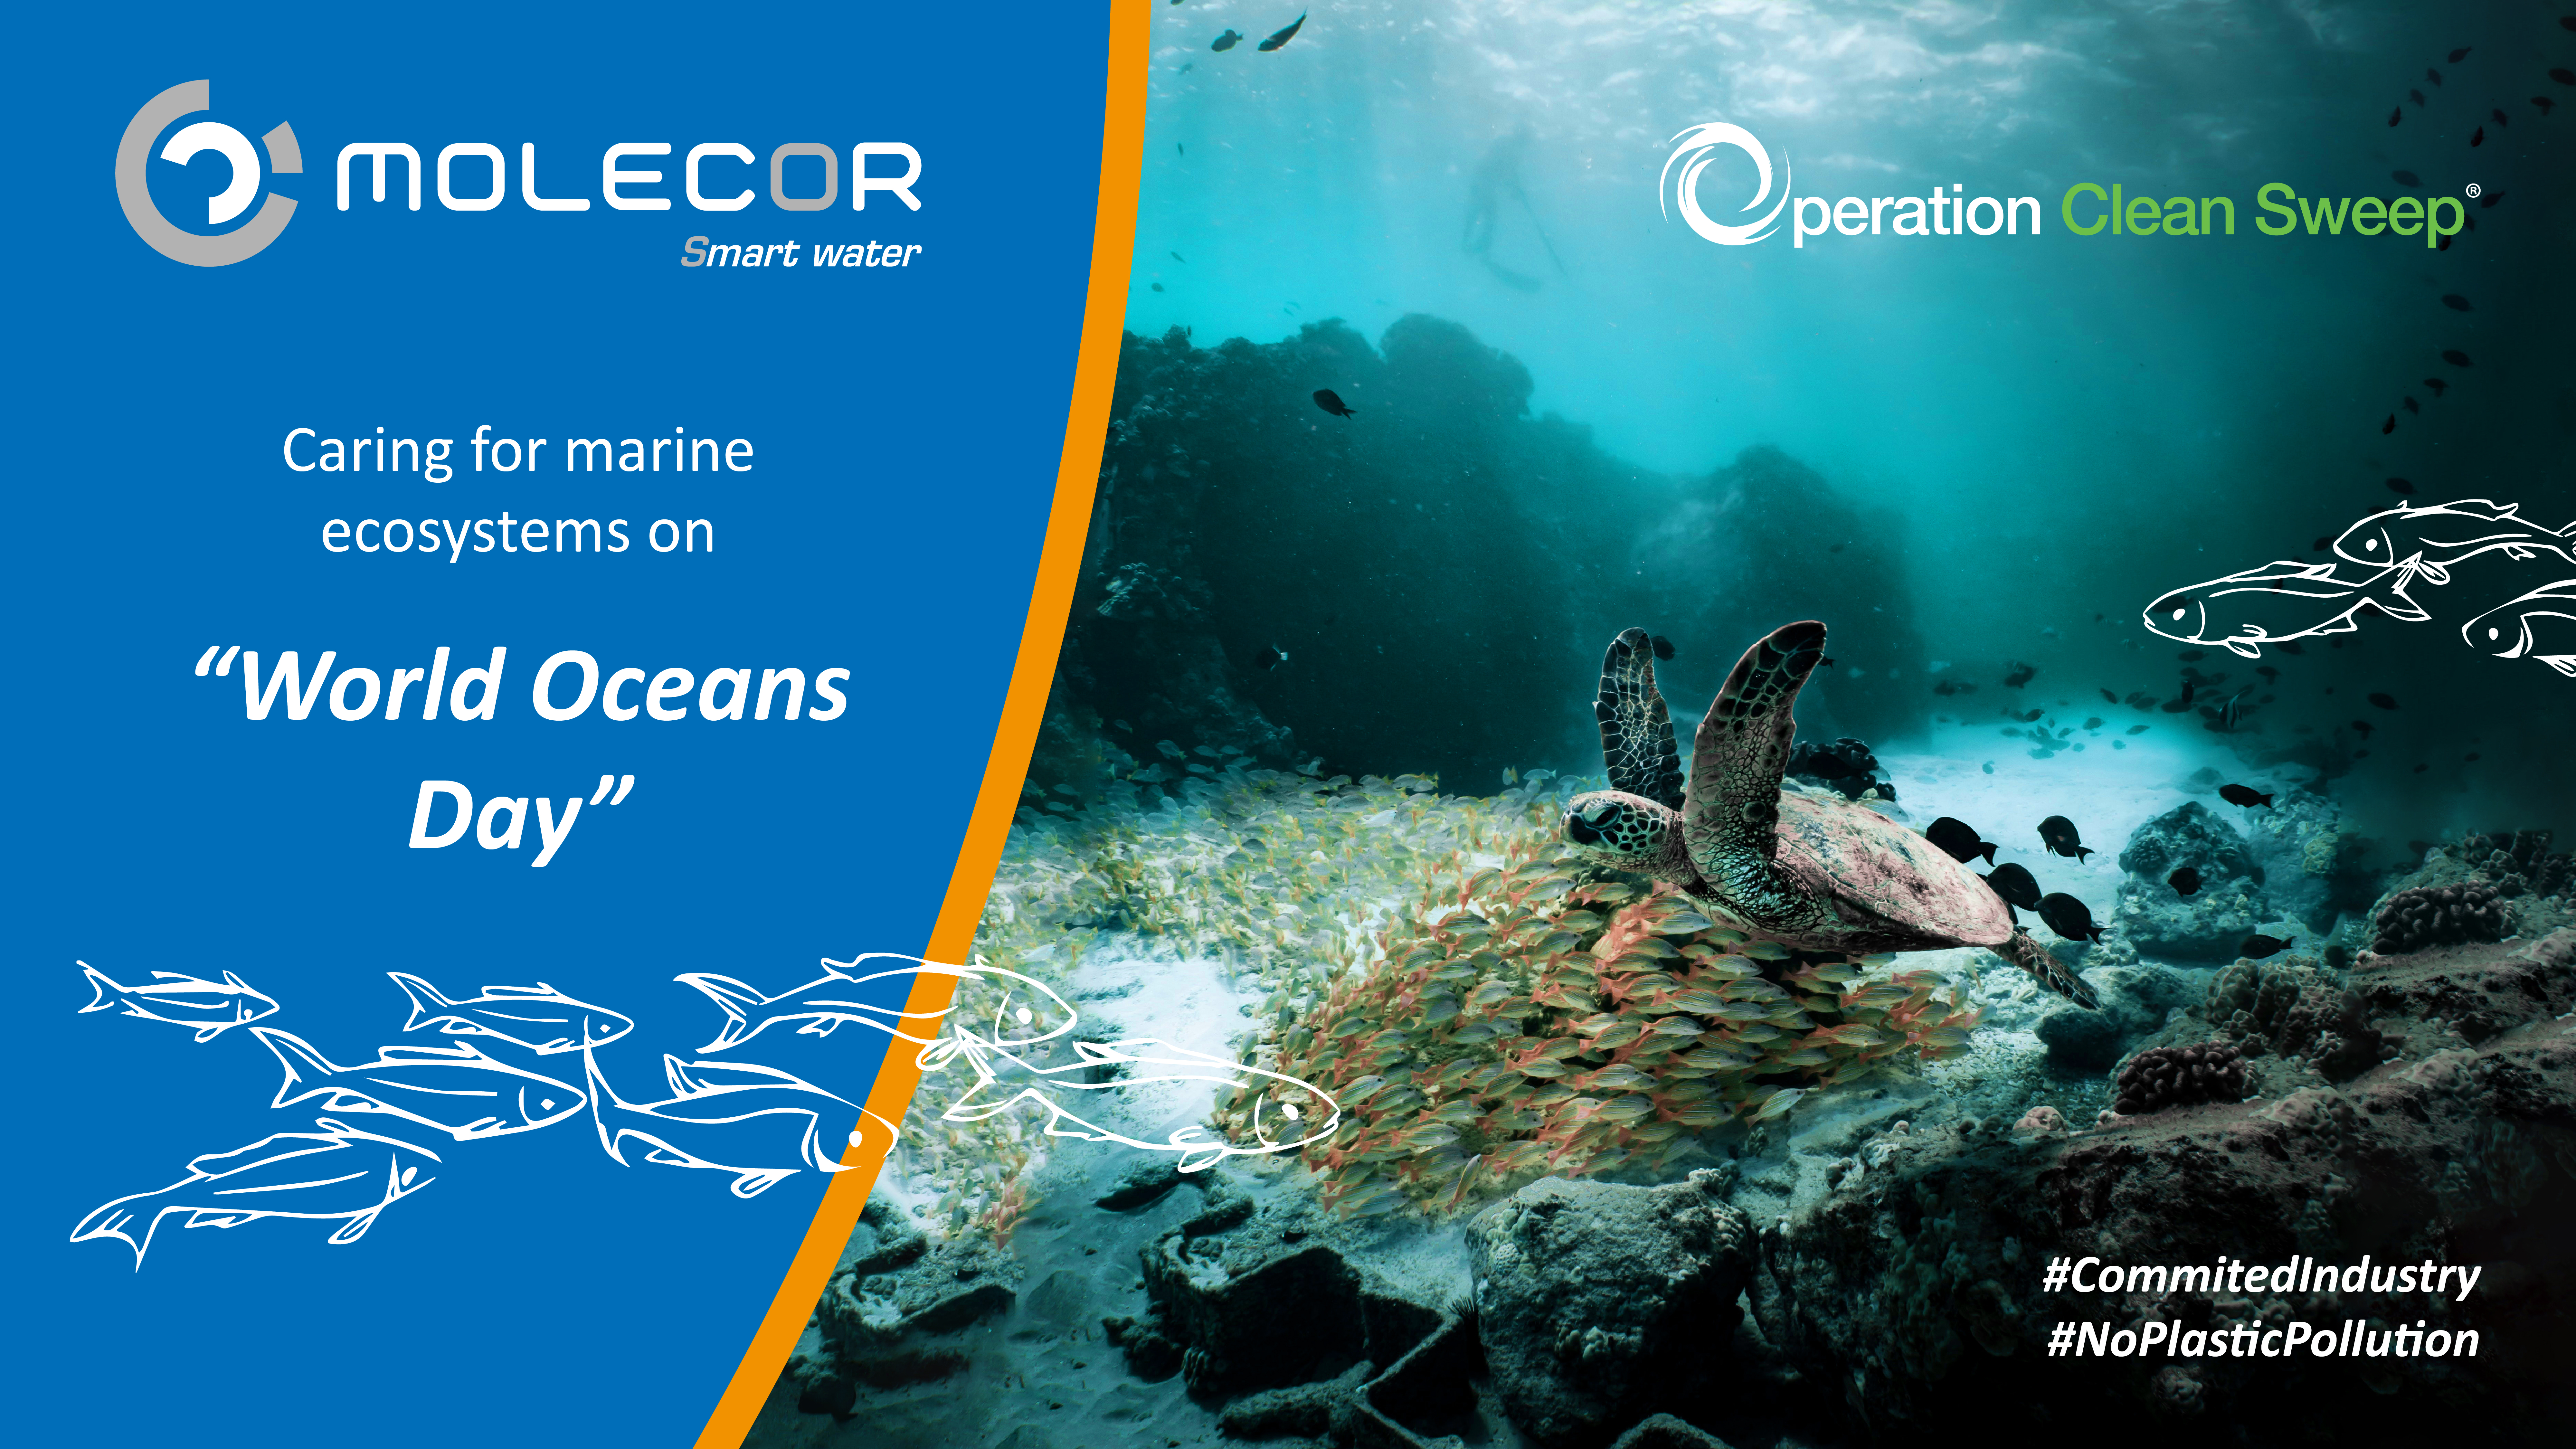 Molecor joins the cause to protect marine ecosystems on “World Oceans Day” thanks to the Operation Clean Sweep programme